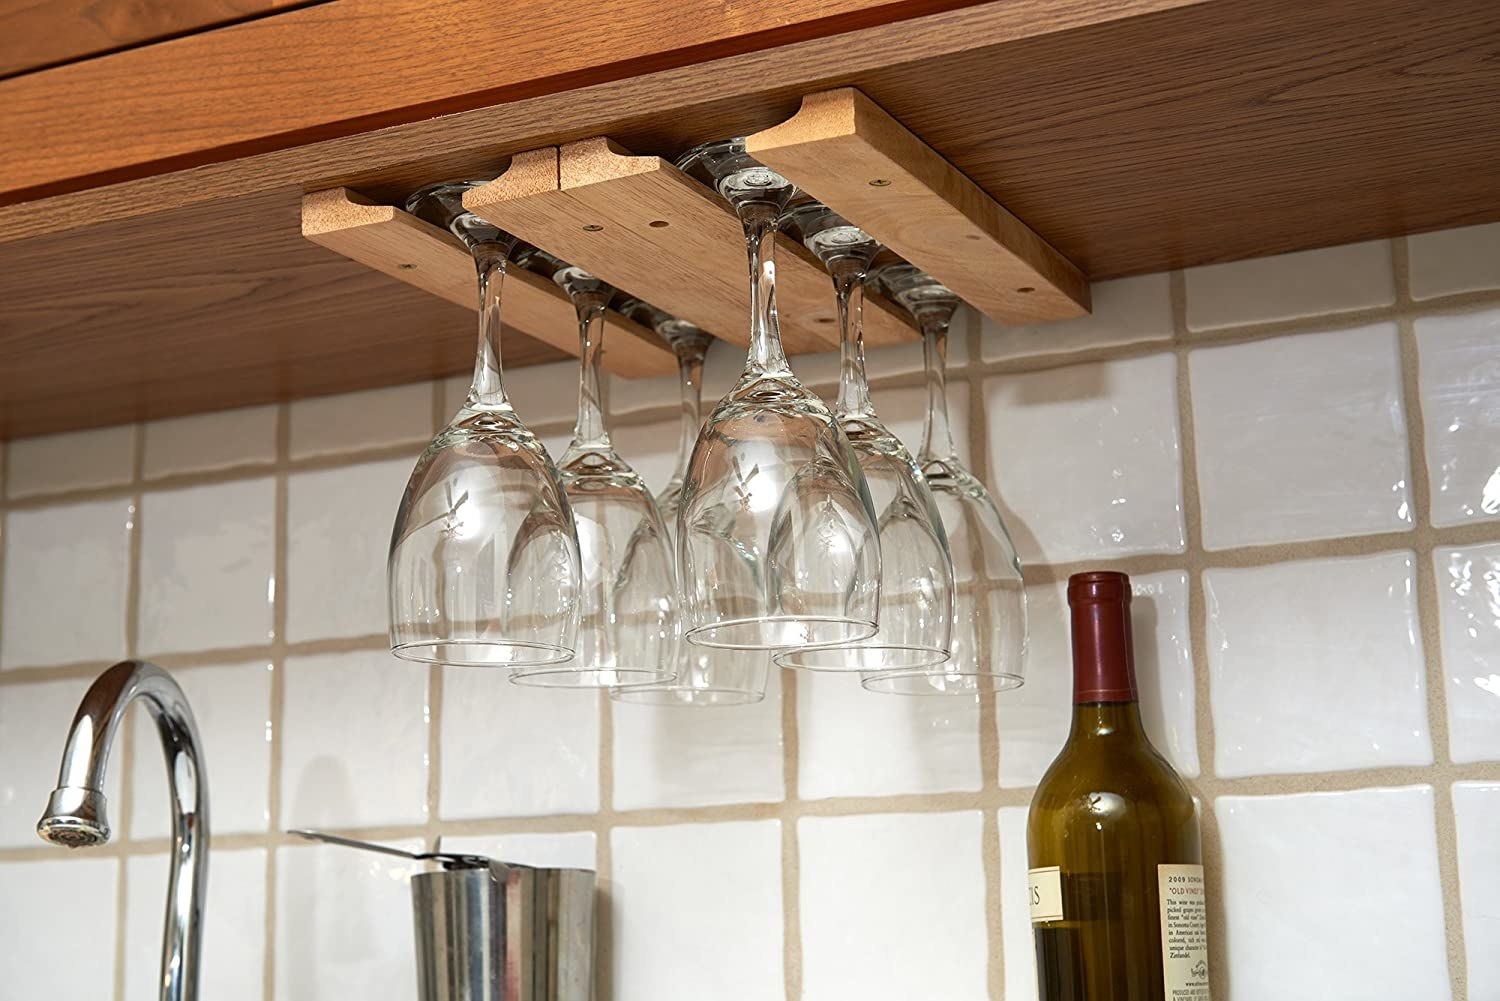 The undermounted rack containing six wine glasses in a neat kitchen